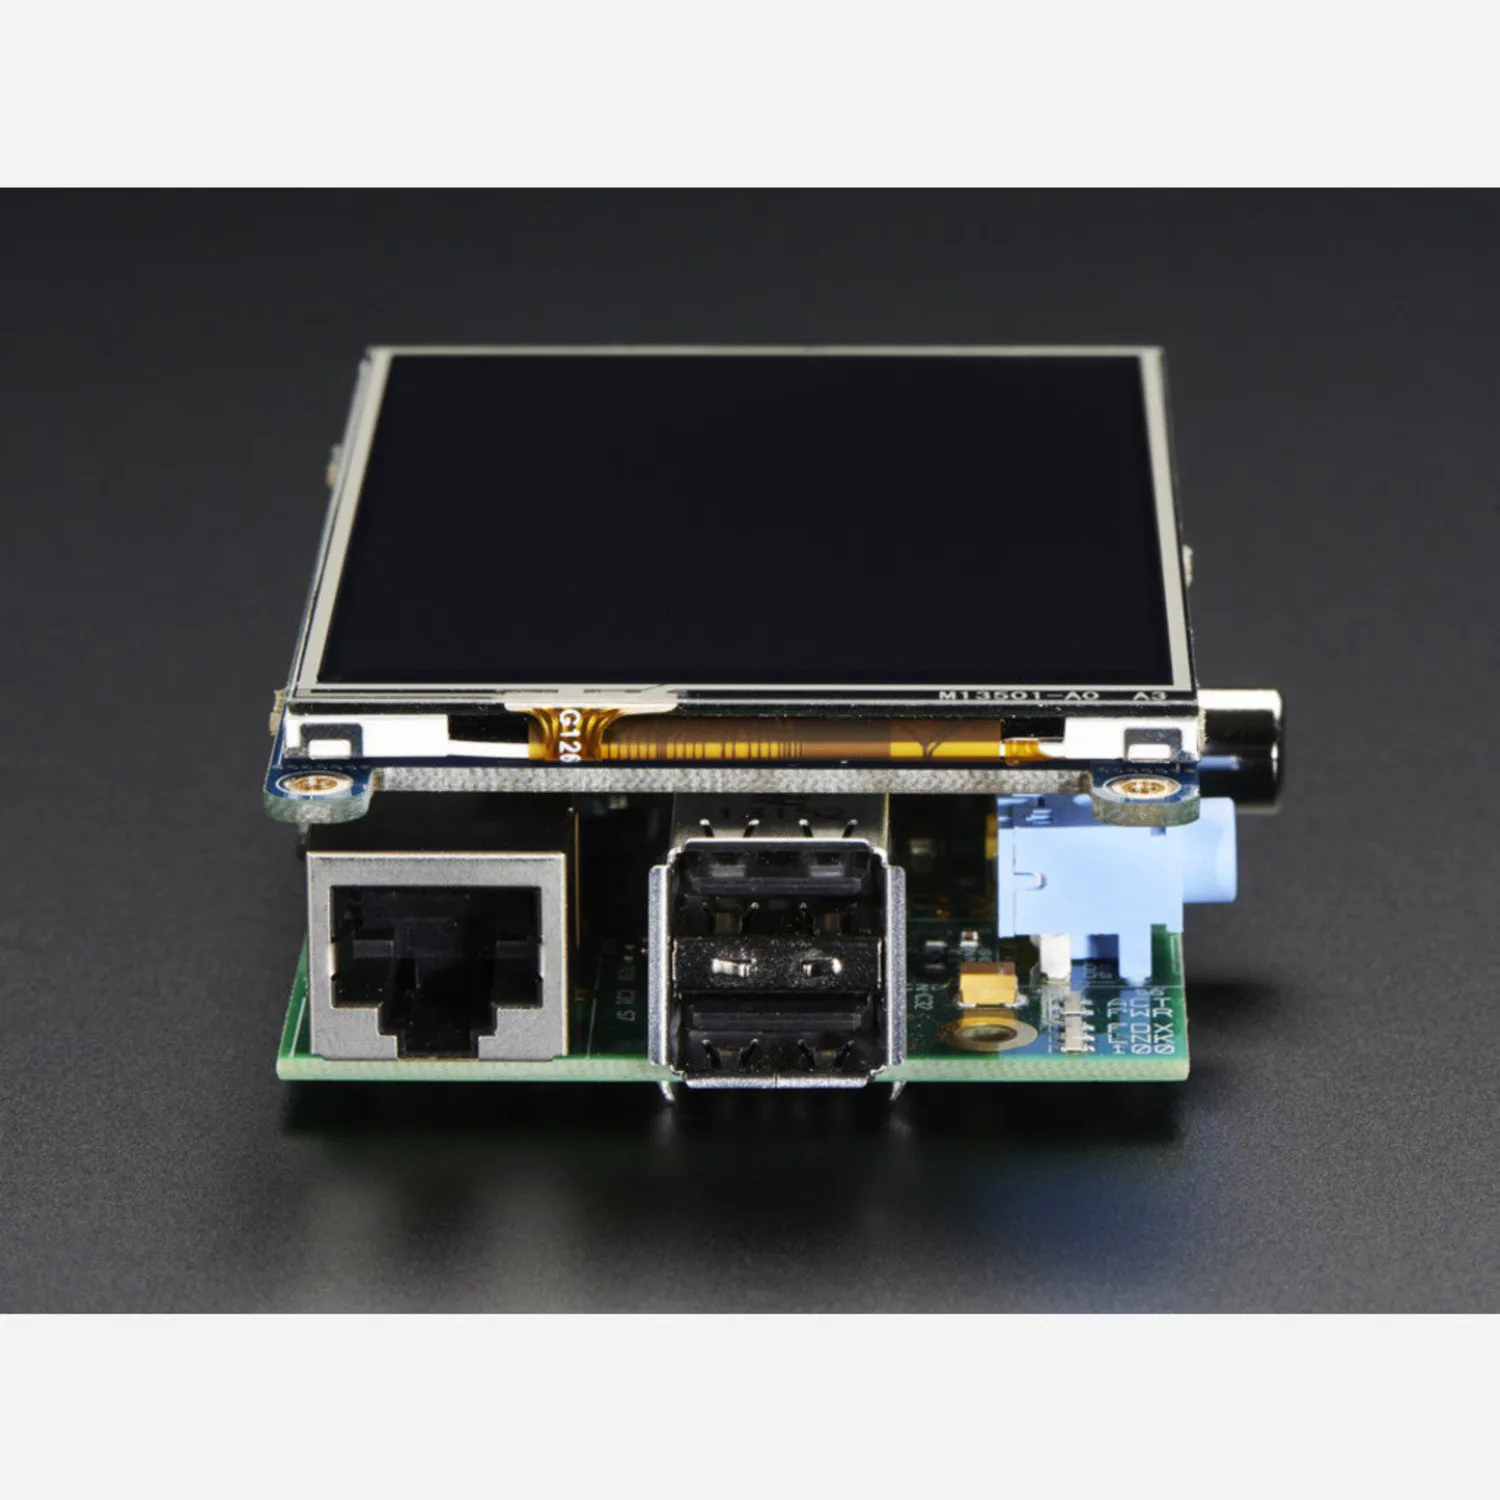 Photo of PiTFT - Assembled 480x320 3.5 TFT+Touchscreen for Raspberry Pi